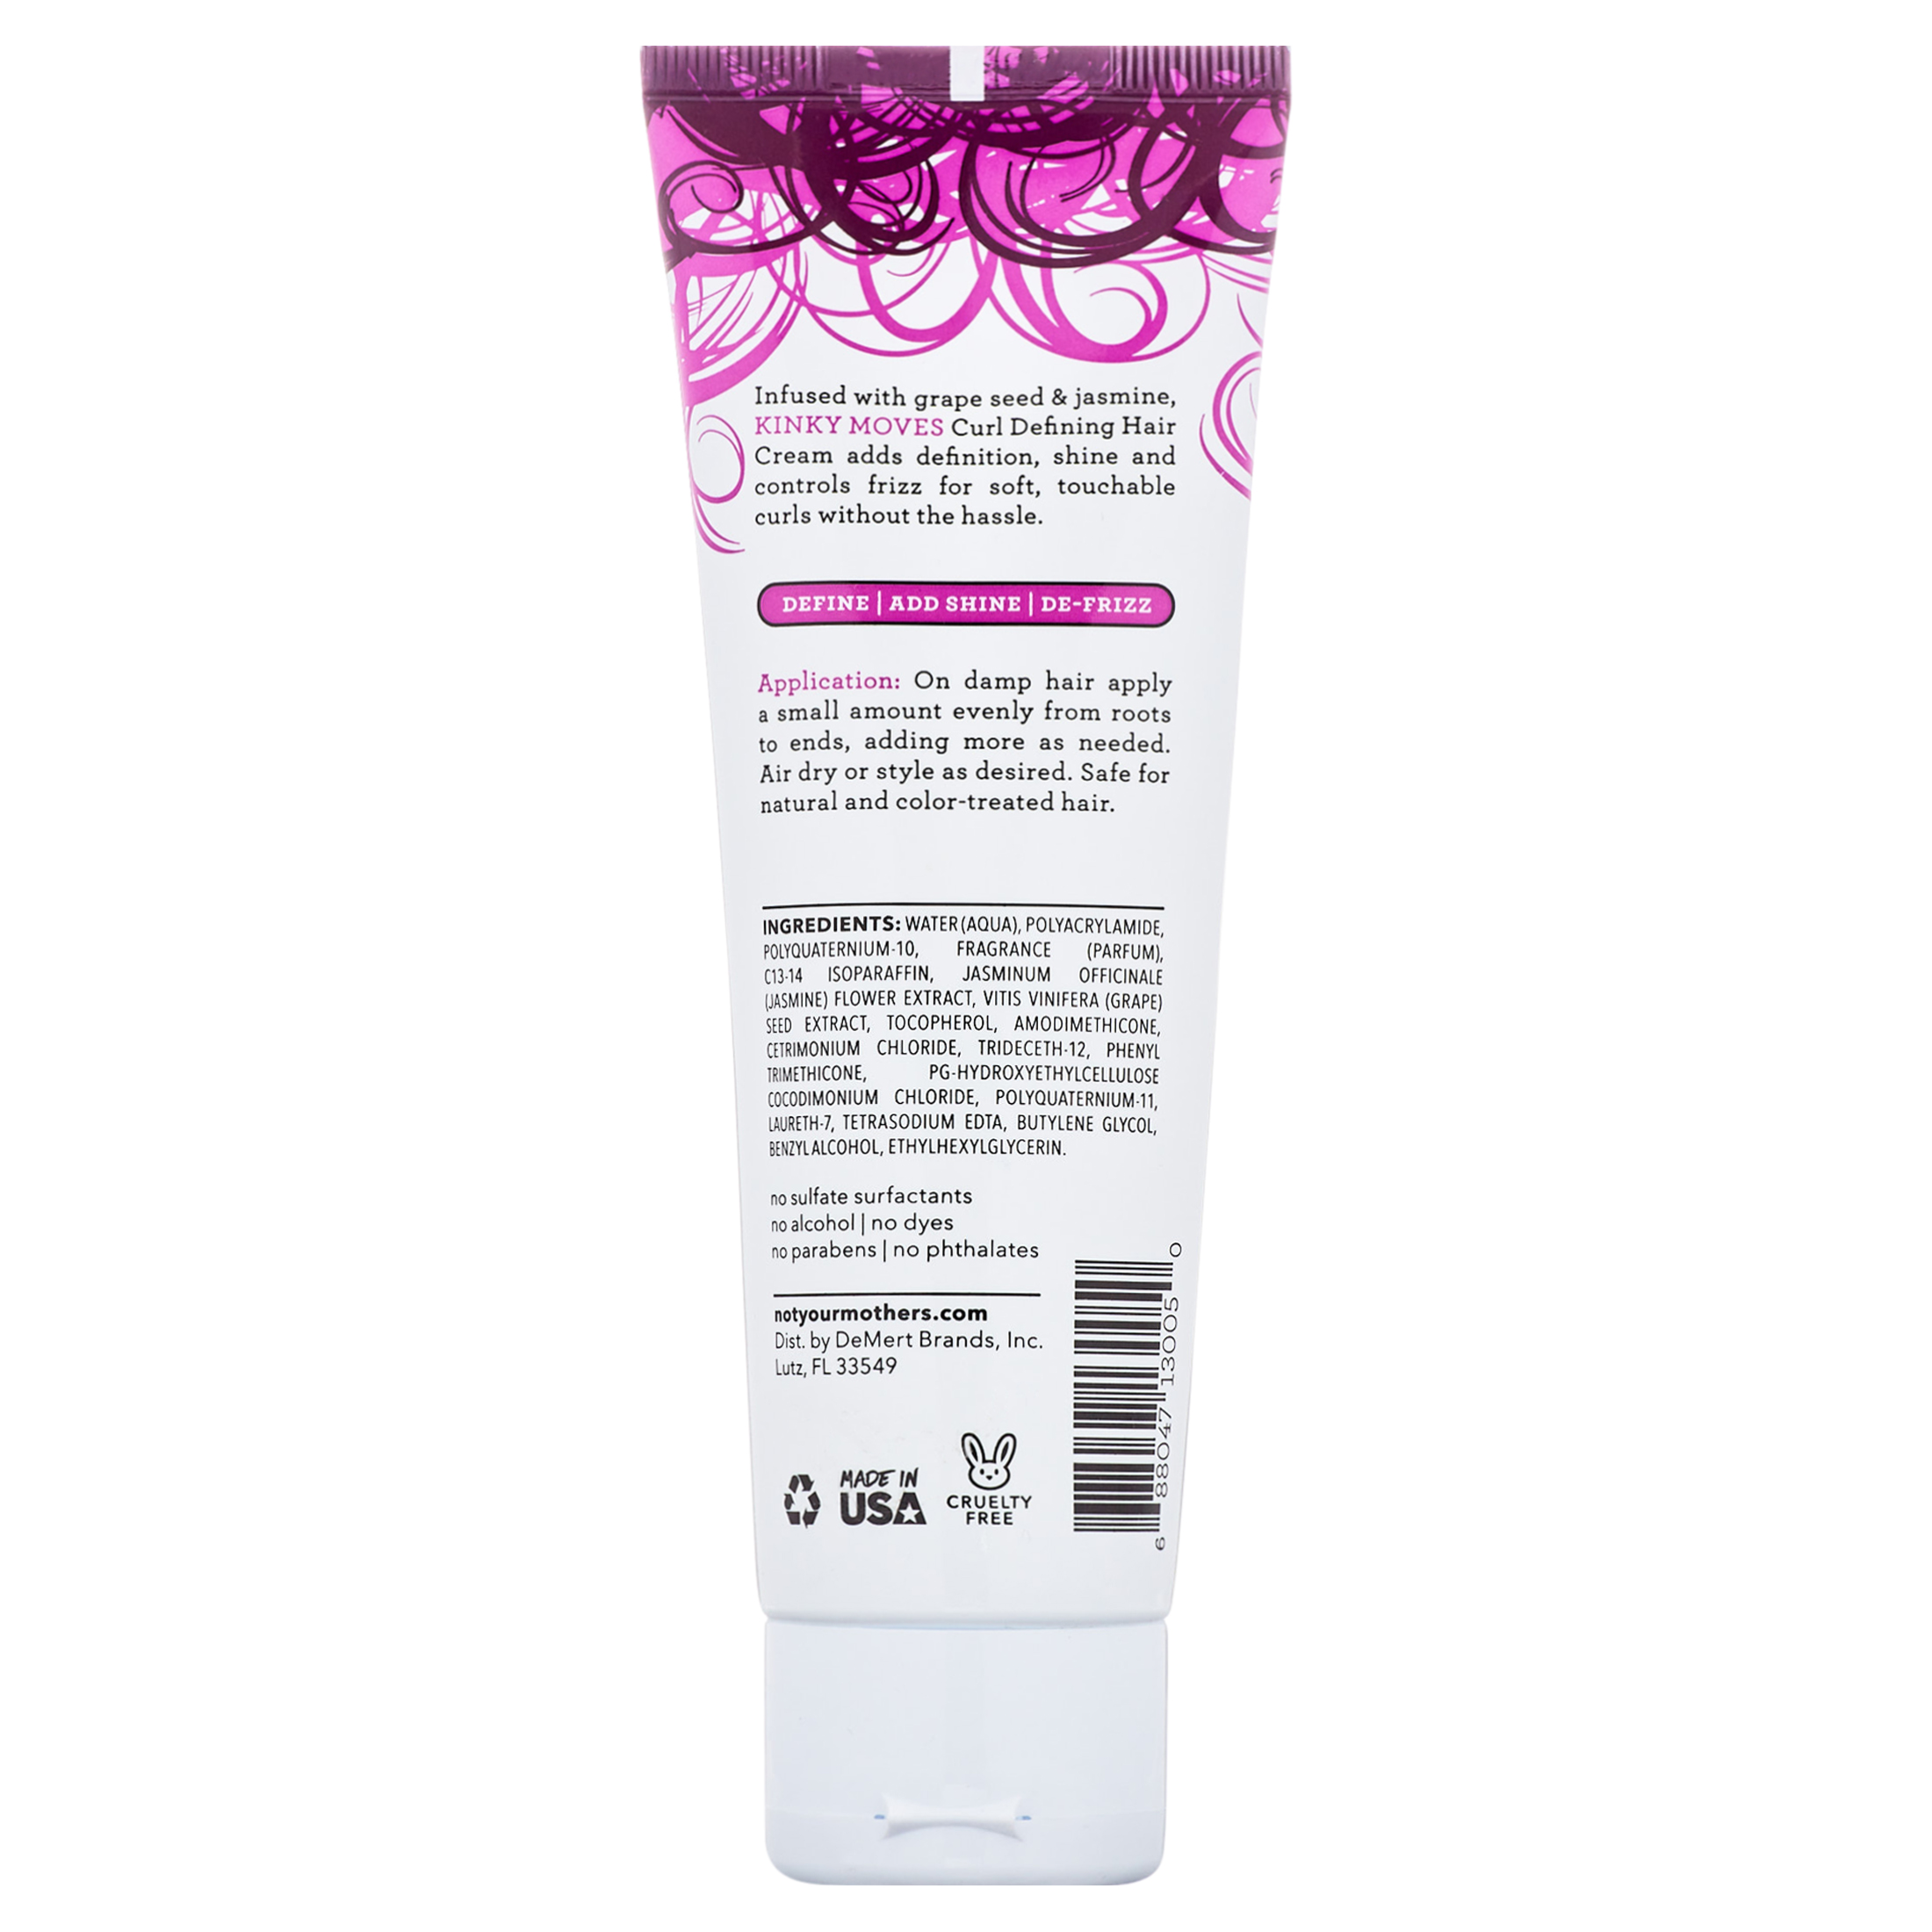 Not Your Mother's Kinky Moves Curl Defining Hair Cream to Enhance Natural Curls, 4 fl oz - image 9 of 10